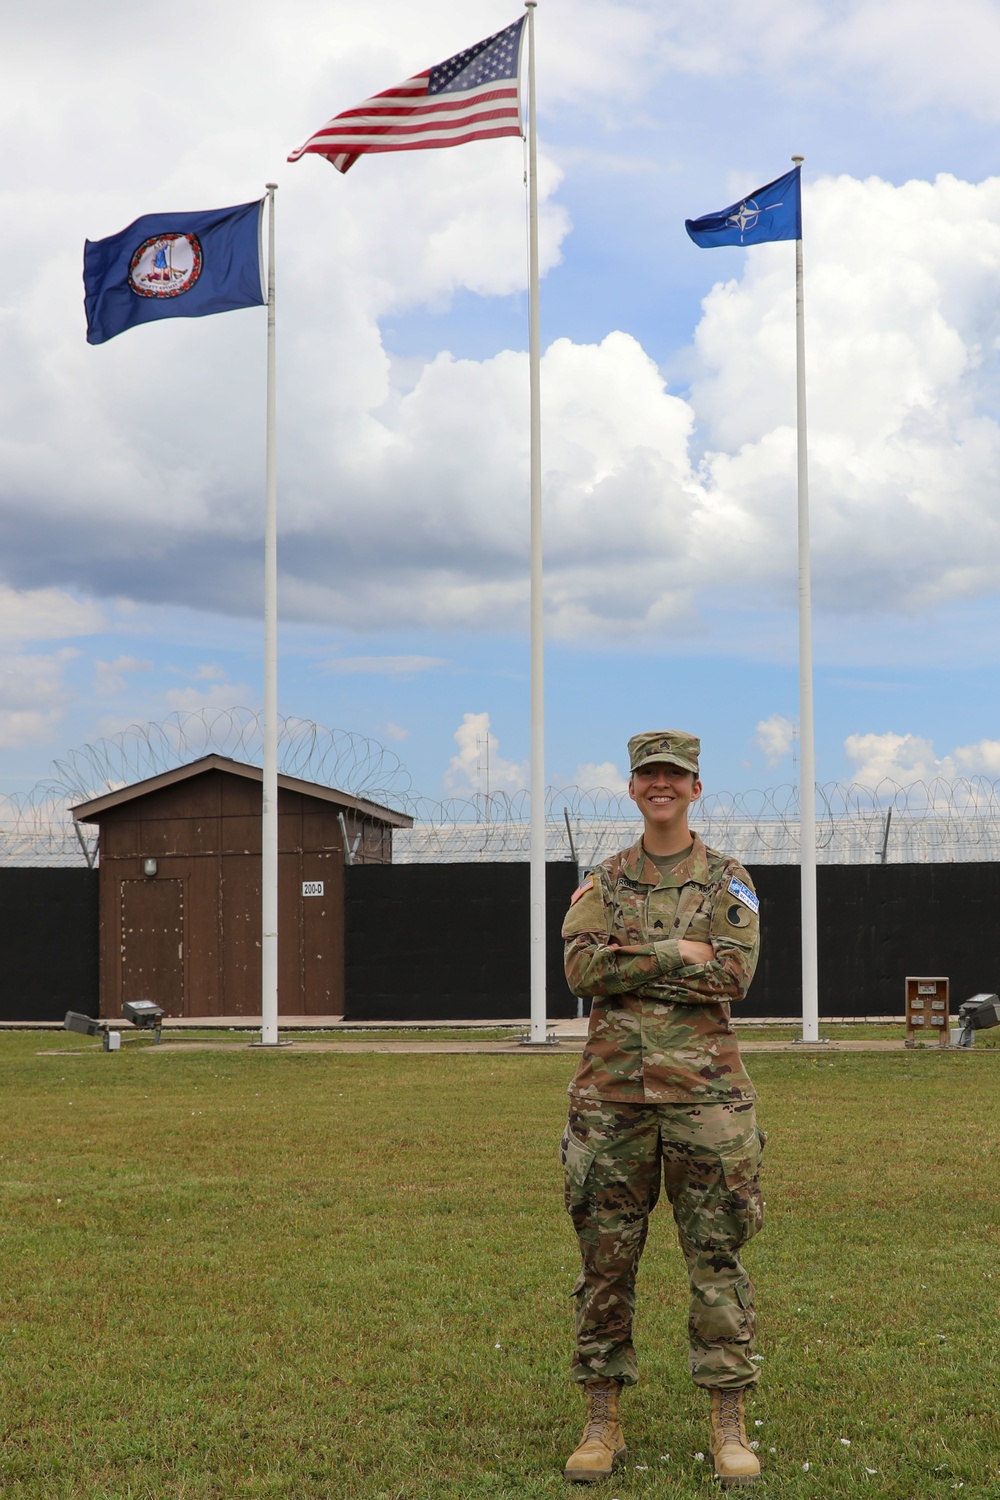 Virginia Soldier provides cost-free aviation training to deployed service members